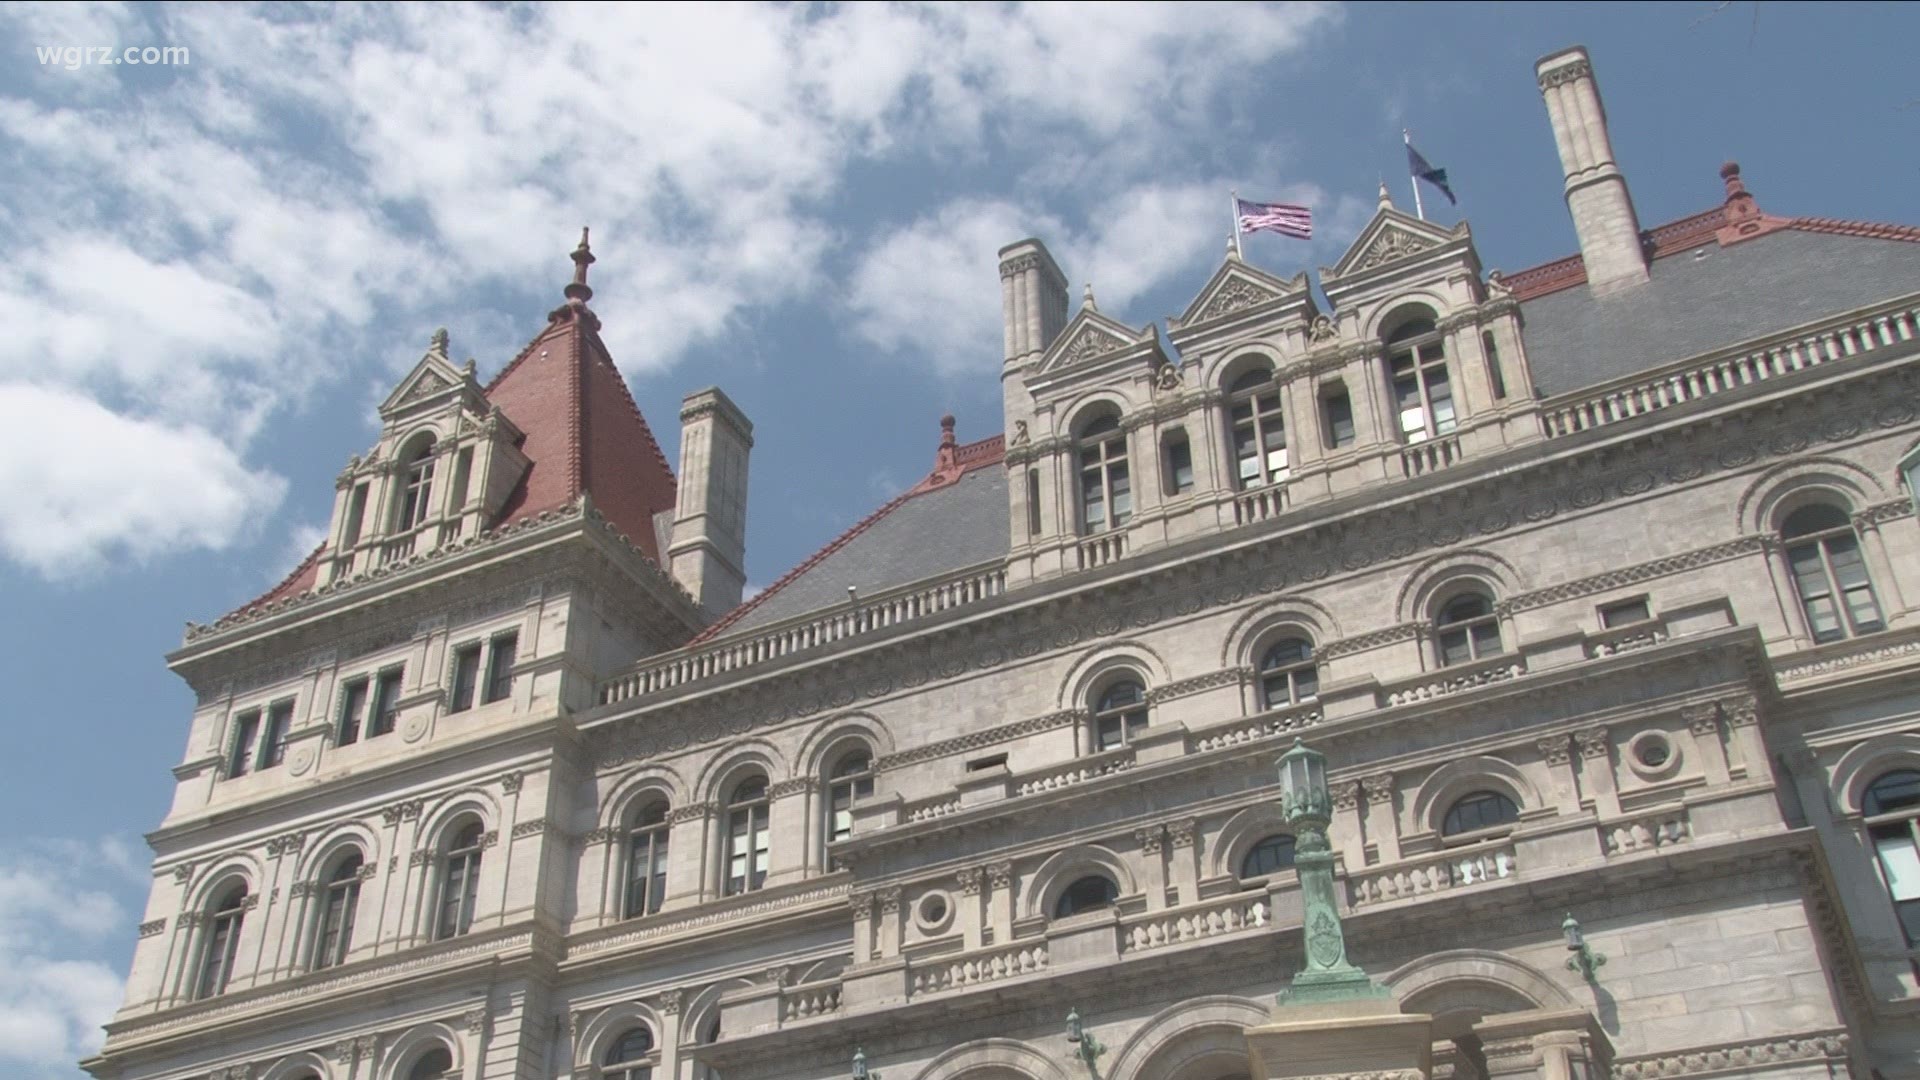 The focus is on Albany today, with developments on a number of fronts regarding Governor Cuomo and the scandals swirling around him.